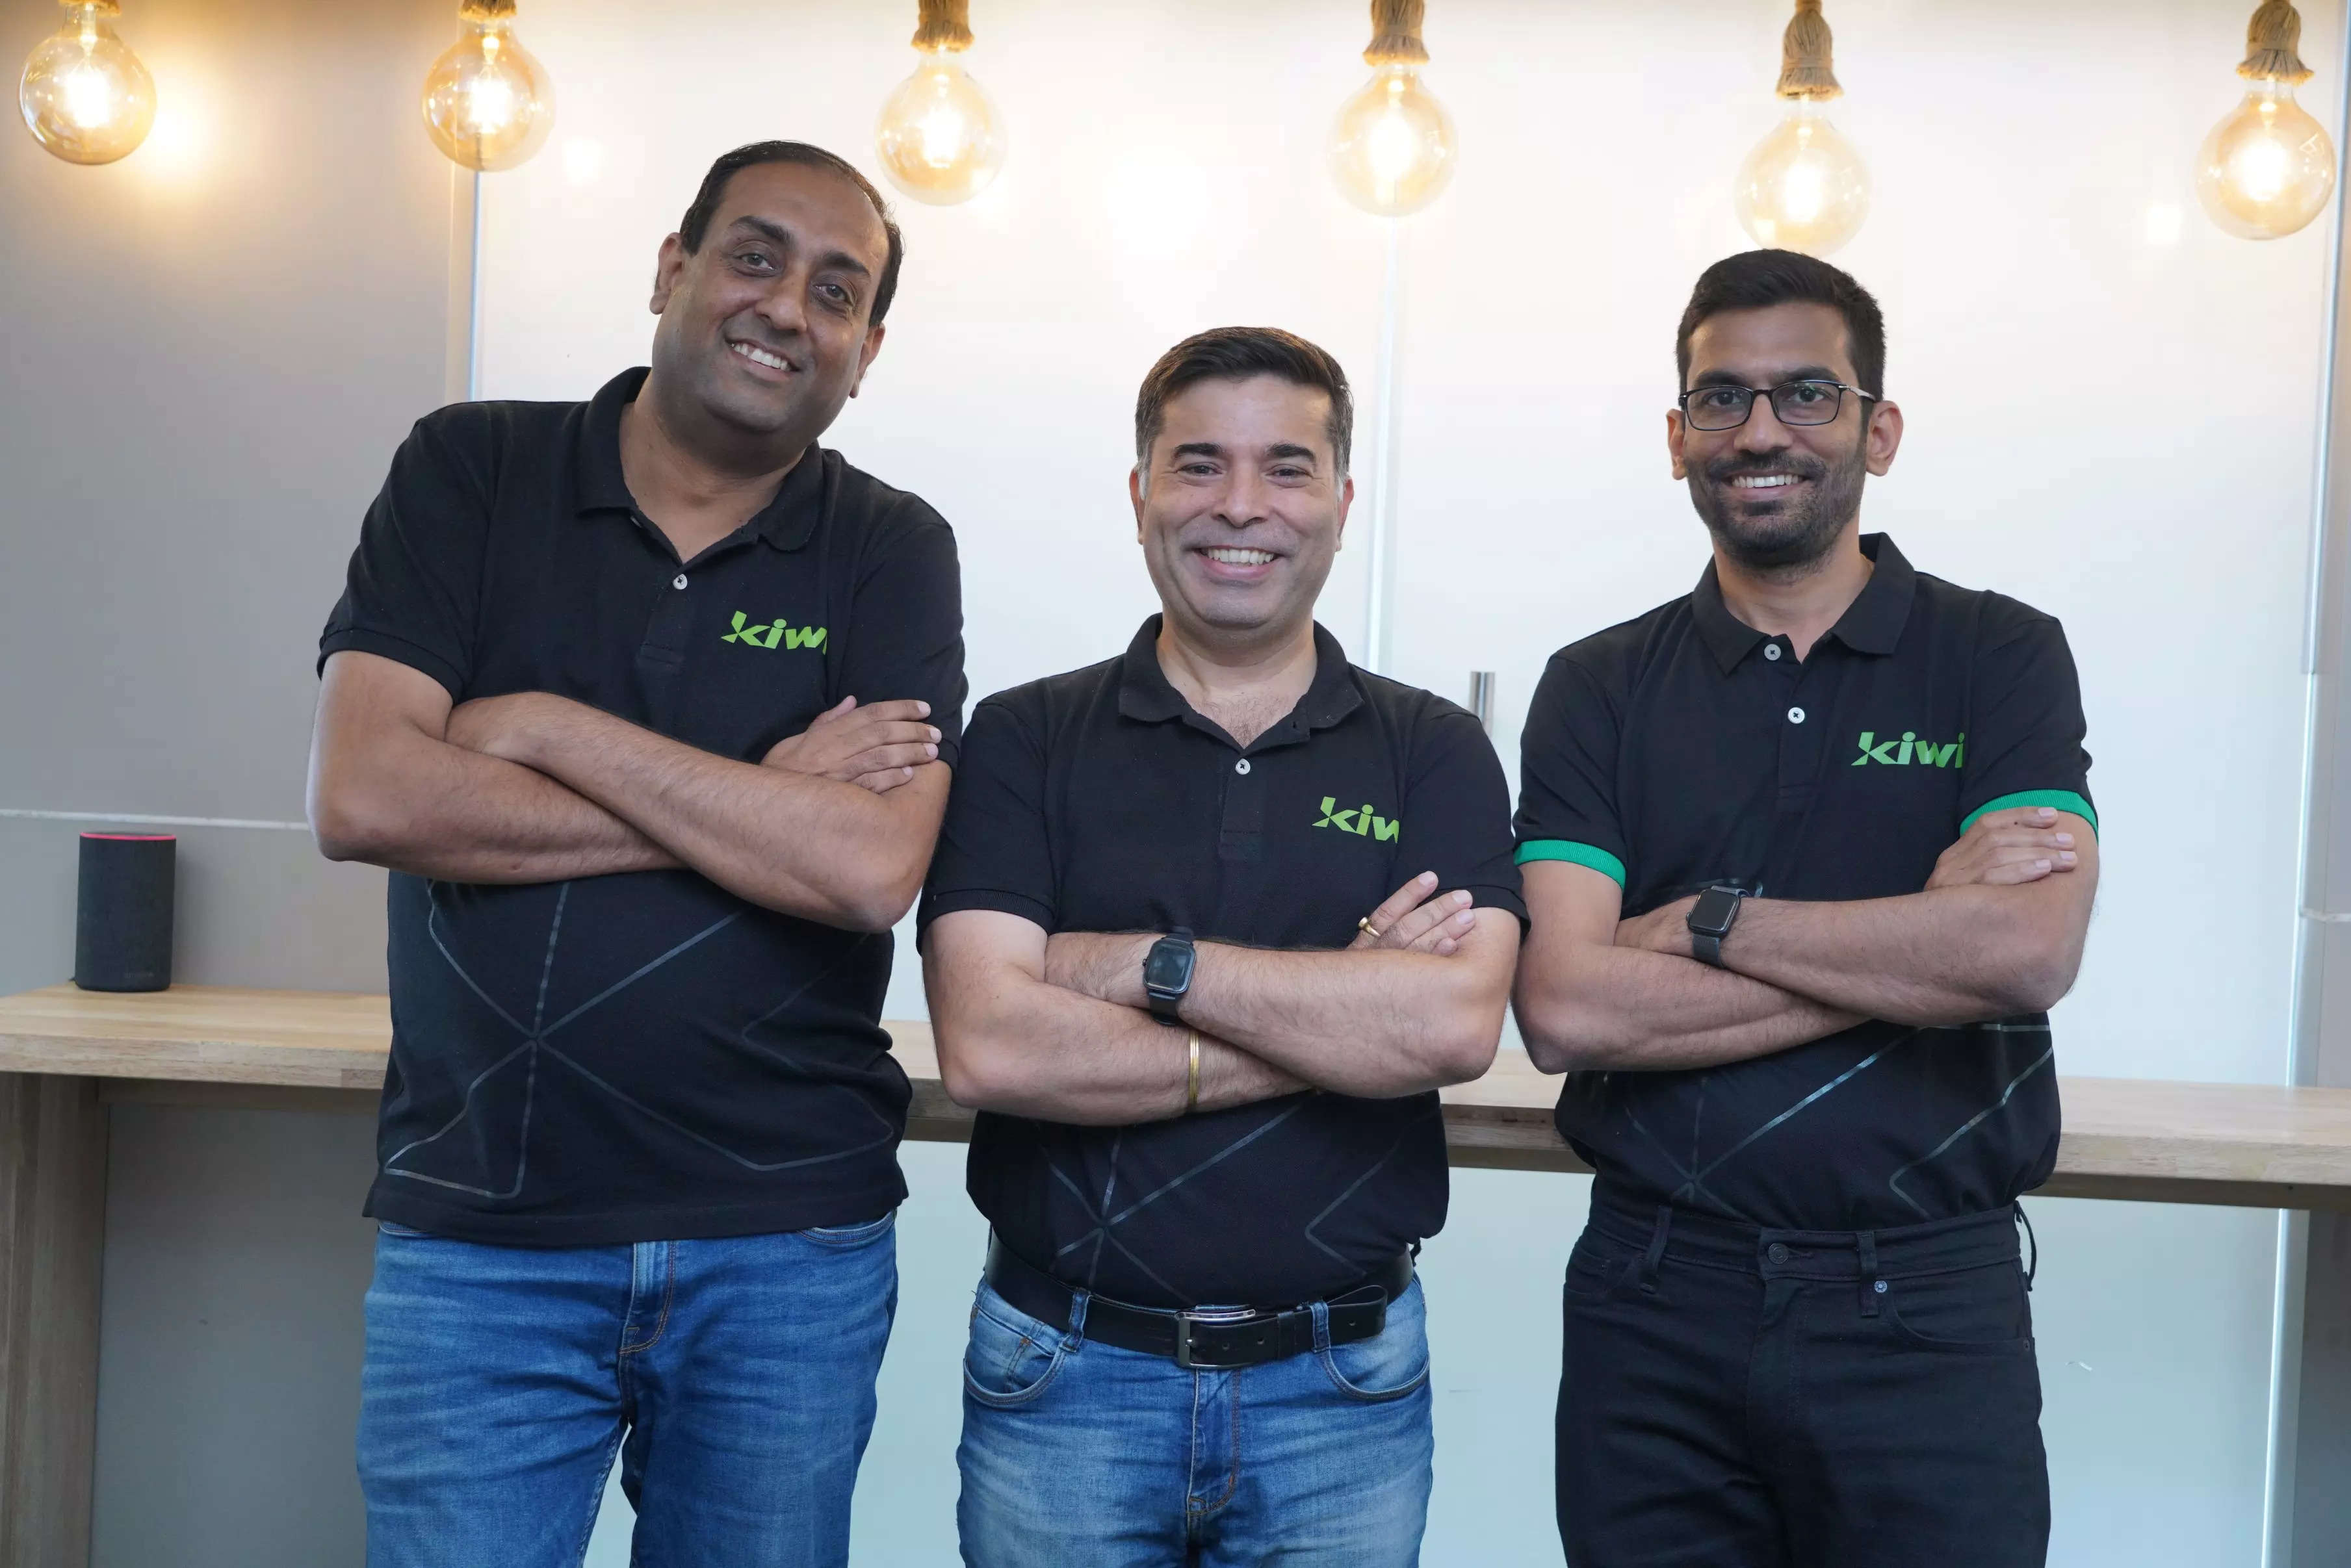 Co-founders of Kiwi_Siddharth Mehta, Mohit Bedi, Anup Agrawal